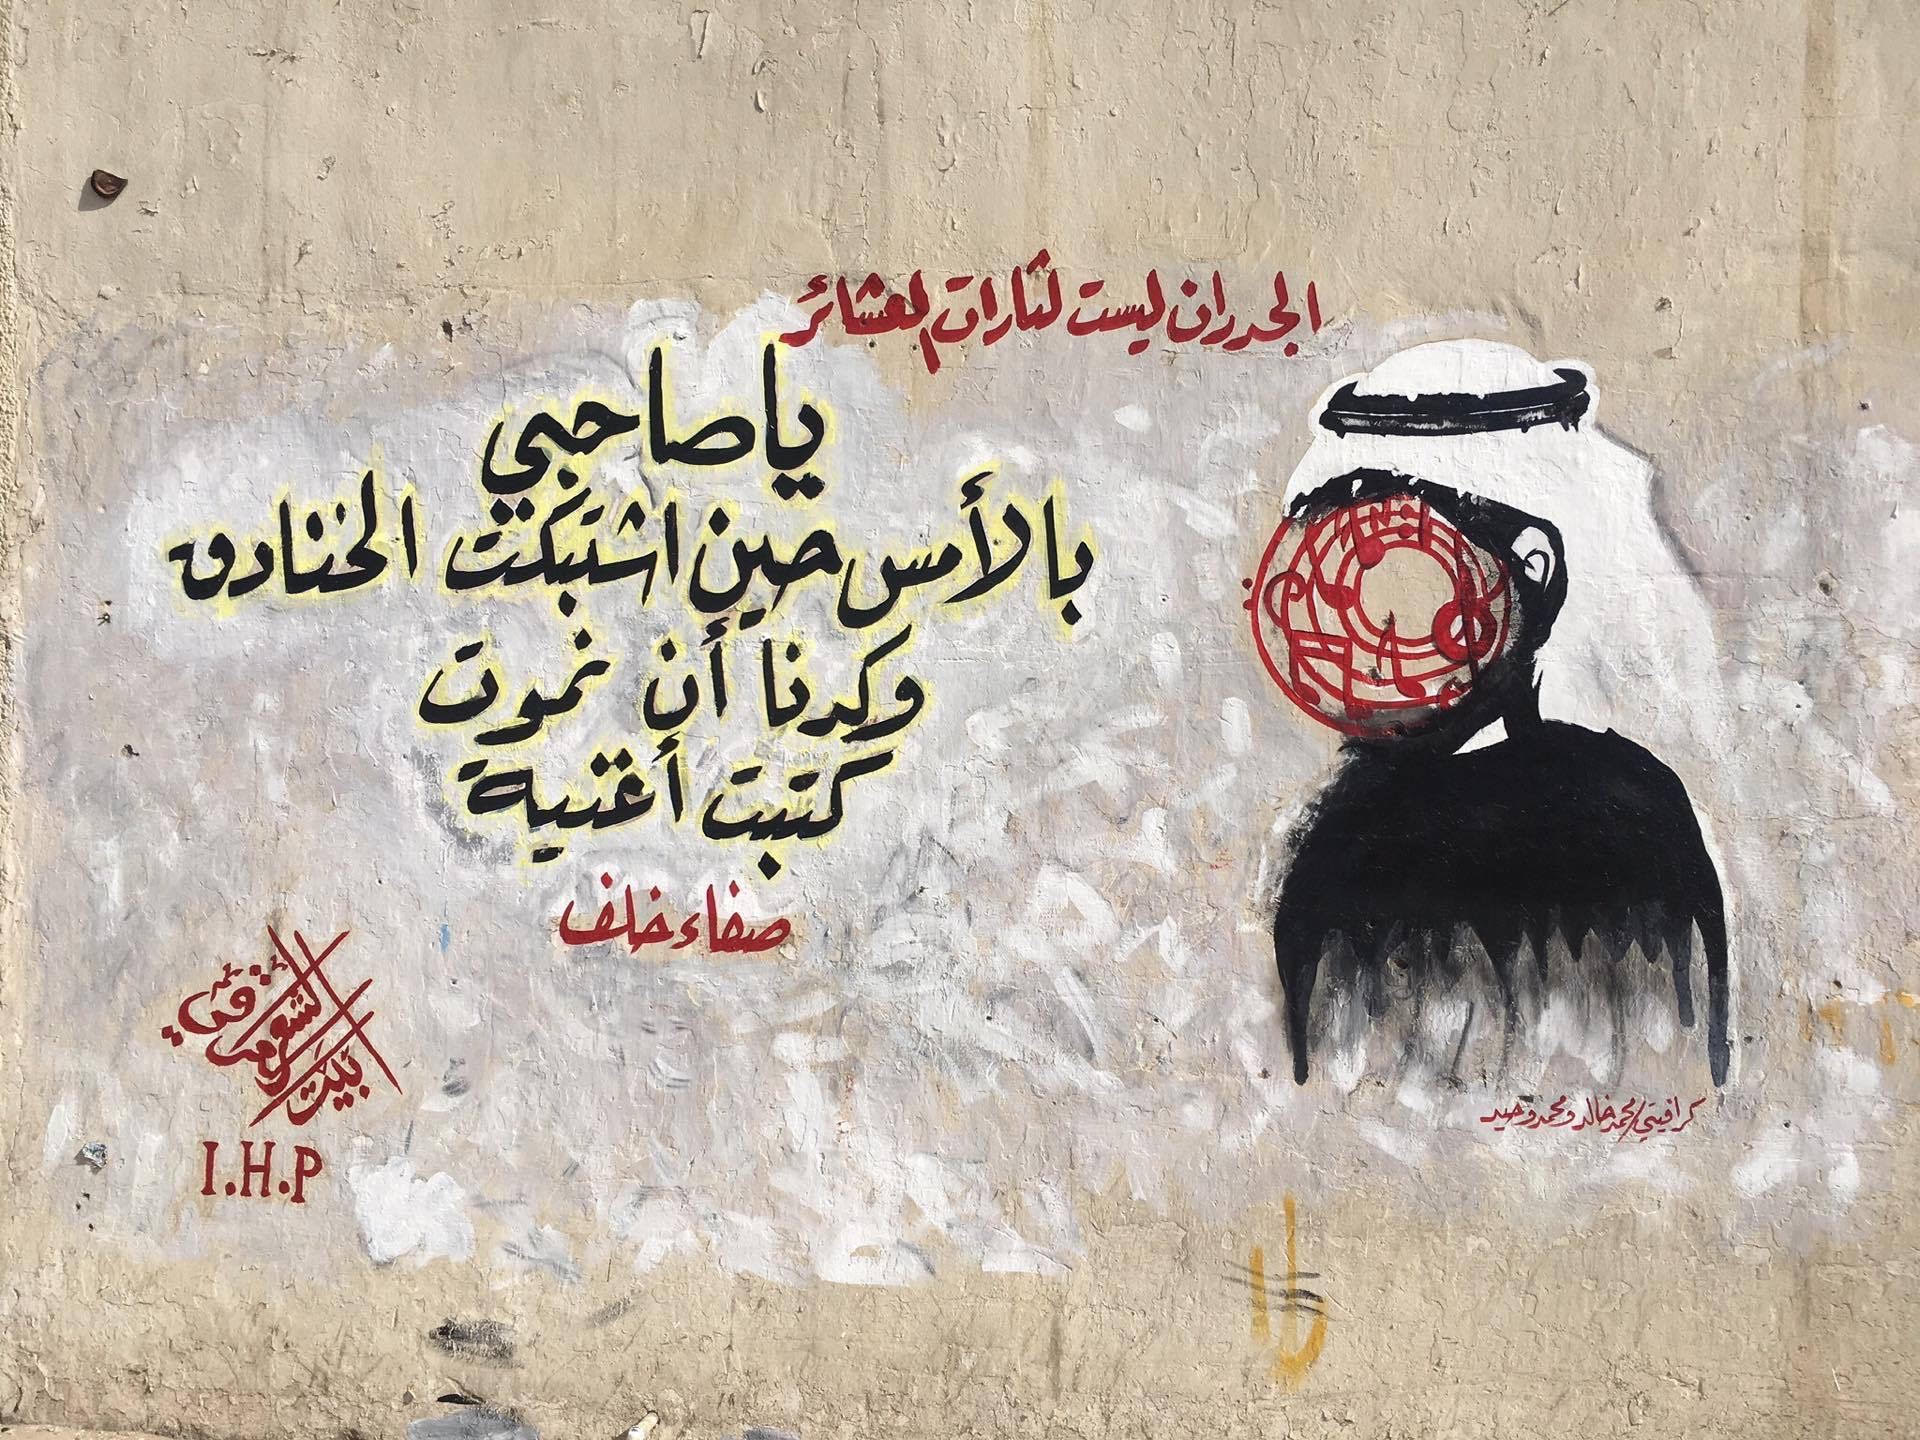 A poetic text by Safaa Khalaf on one of the walls in Baghdad, criticising tribal fighting and calling for singing rather than killing. Photo.